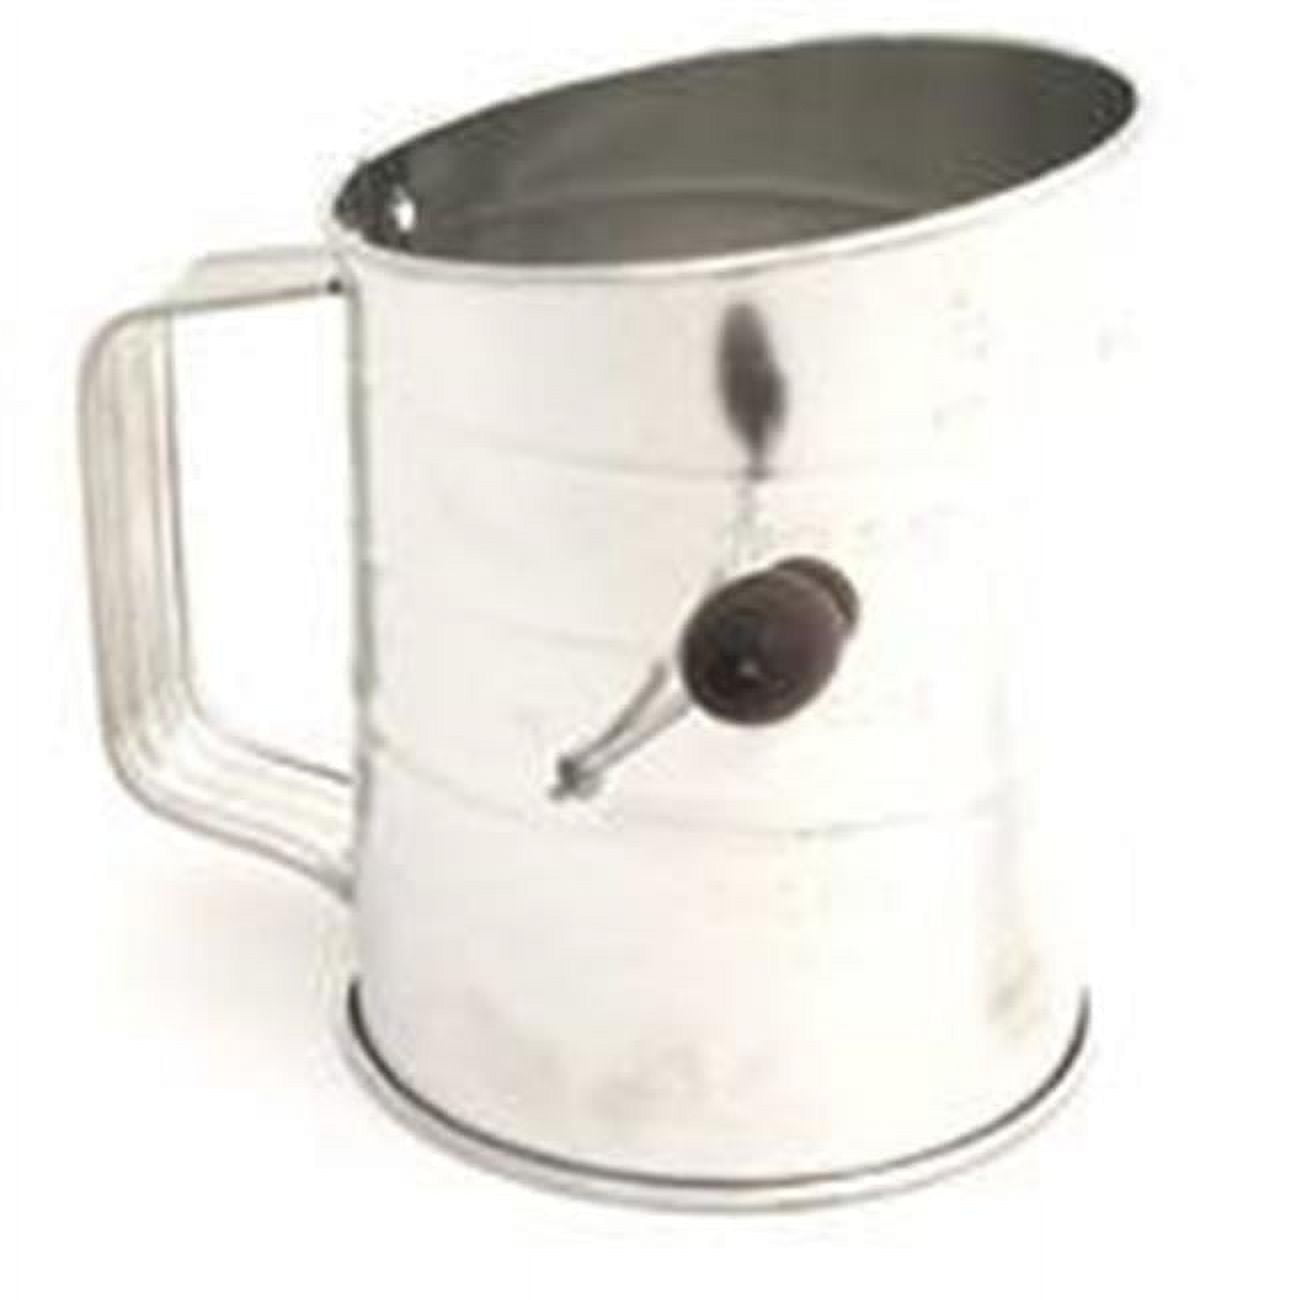  Norpro Polished Stainless Steel Hand Crank Sifter, 8 cups/64  ounces, As Shown: Stainless Steel Flour Sifter: Home & Kitchen